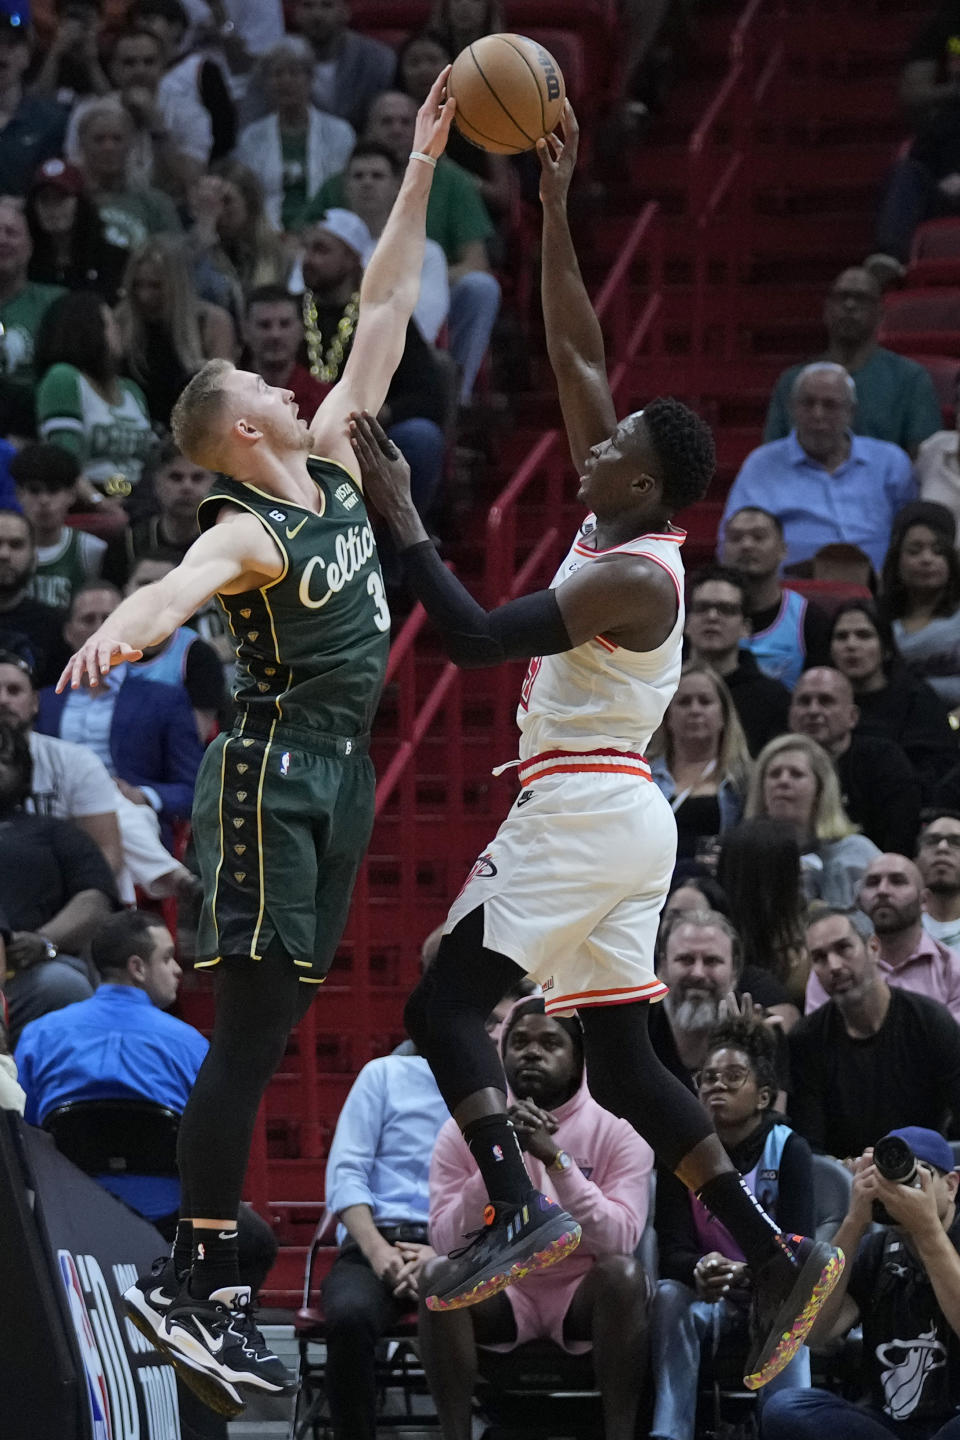 Boston Celtics forward Sam Hauser (30) rejects a shot from Miami Heat guard Victor Oladipo (4) during the first half of an NBA basketball game, Tuesday, Jan. 24, 2023, in Miami. (AP Photo/Wilfredo Lee)